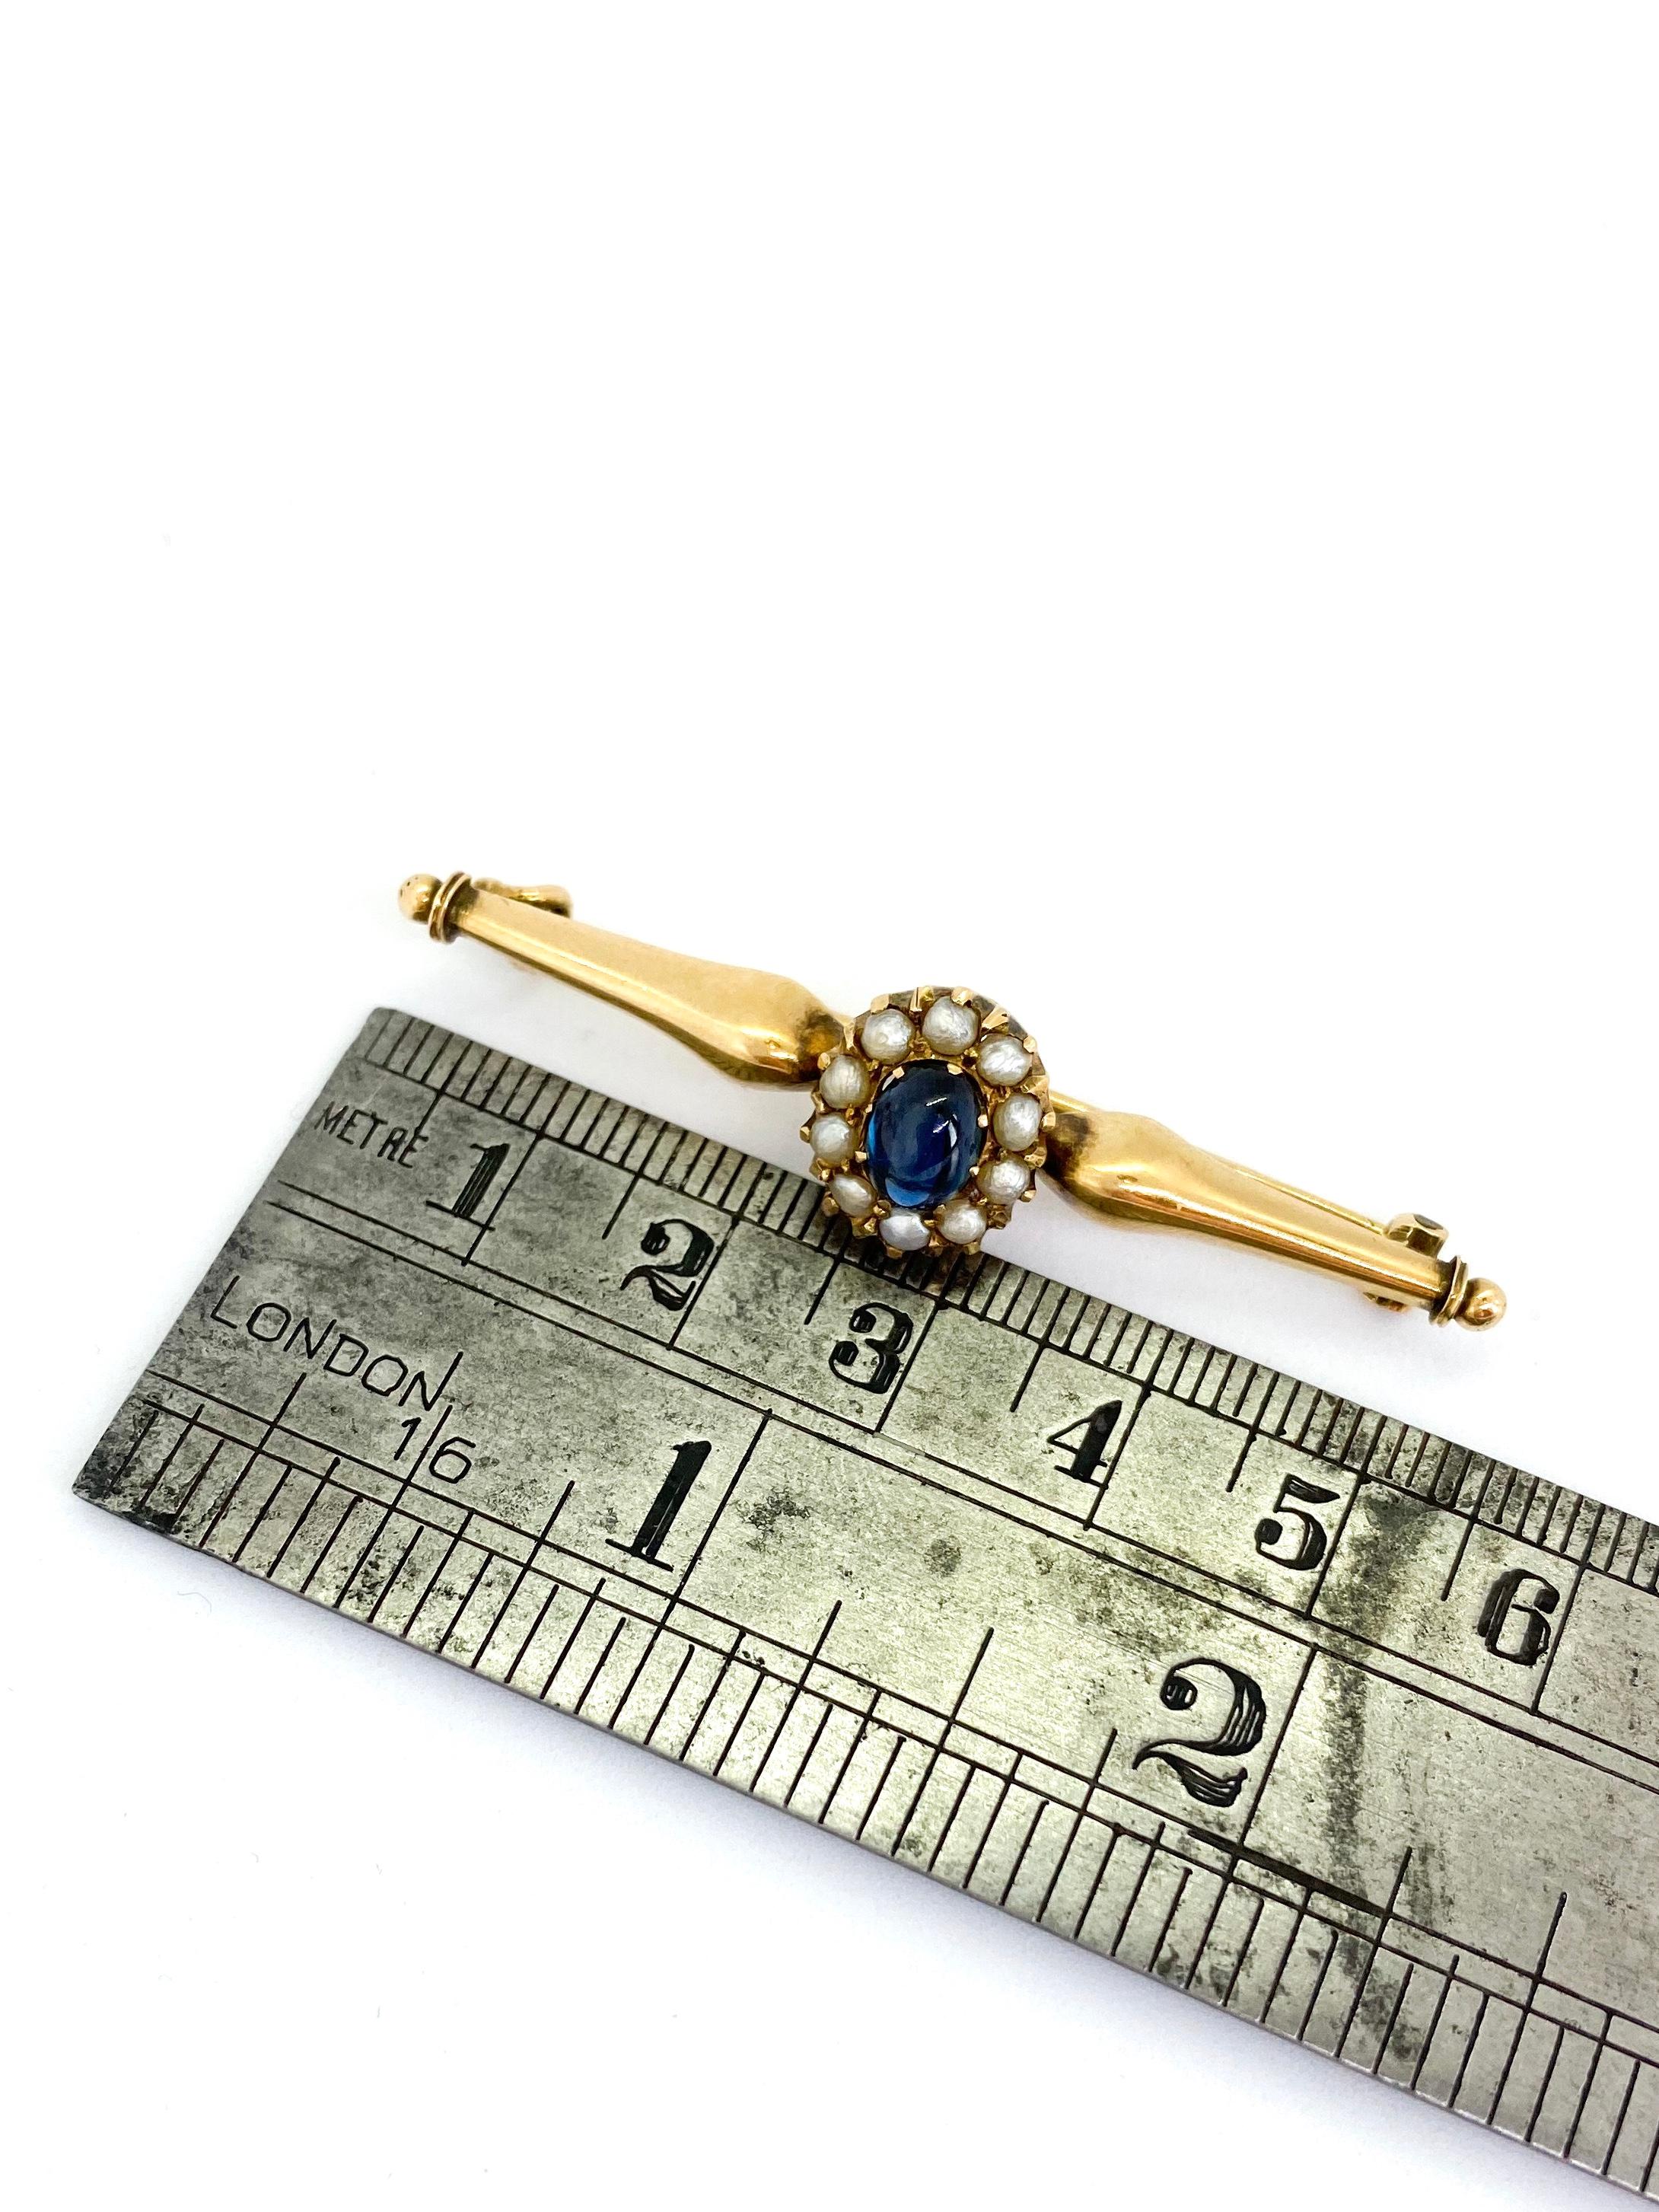 14 Carat Yellow Gold Russia 1.05 Carat Sapphire Pearls Brooch For Sale 4